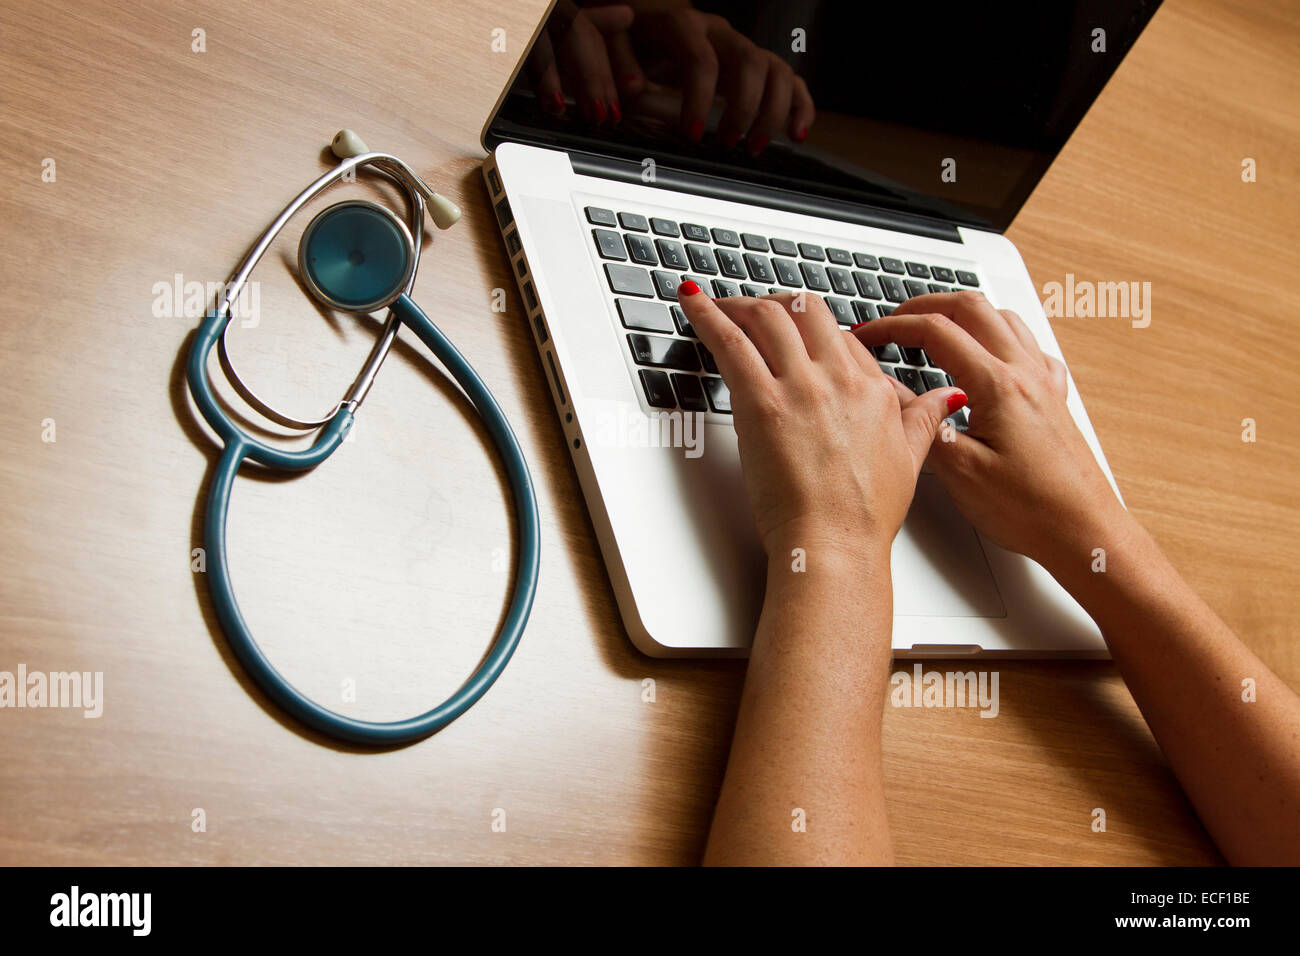 Stethoscope and laptop computer. Stock Photo